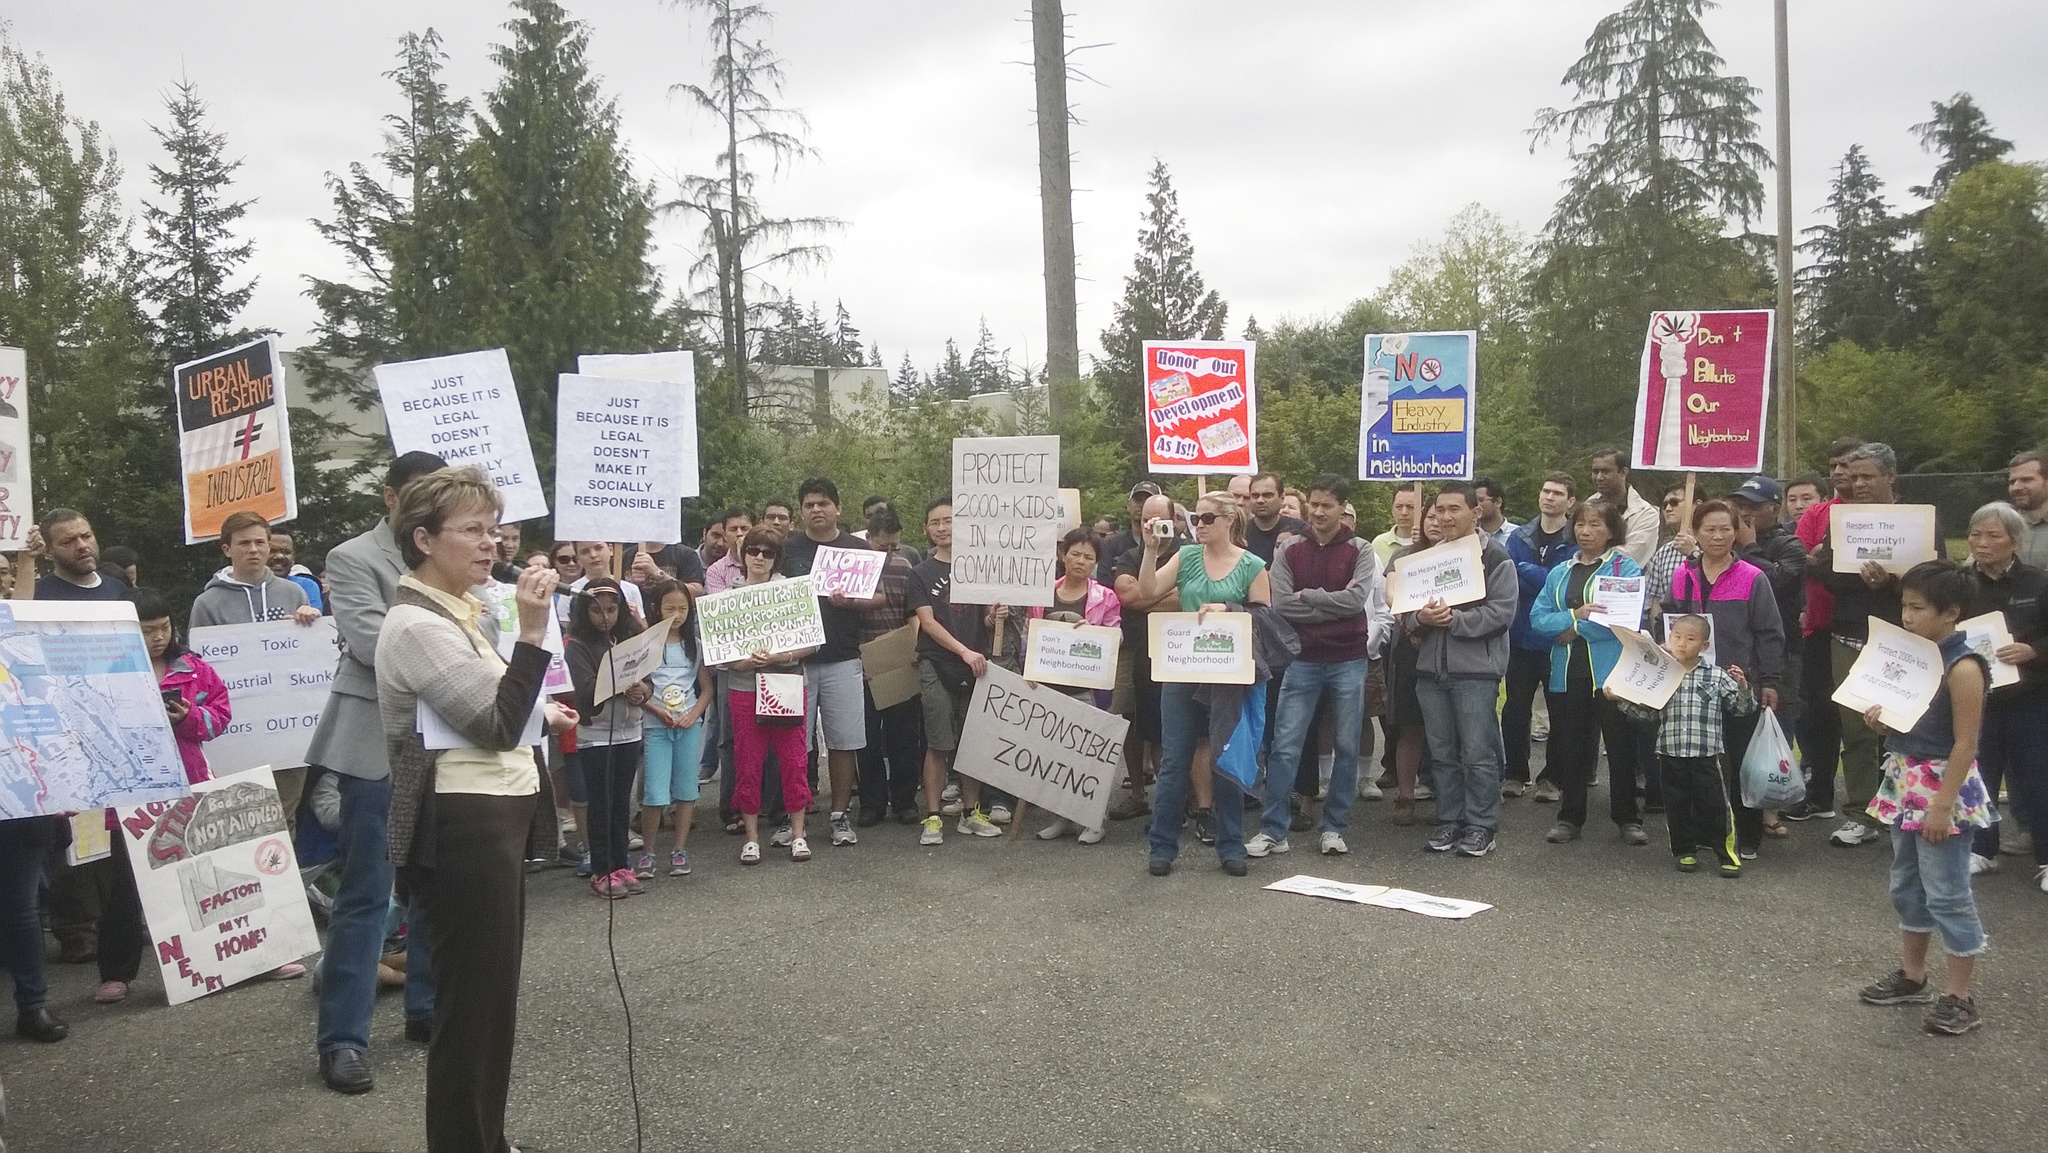 King County Council member Kathy Lambert speaks to Redmond Ridge-area residents at a rally on Saturday. Courtesy of Sai Ramanath